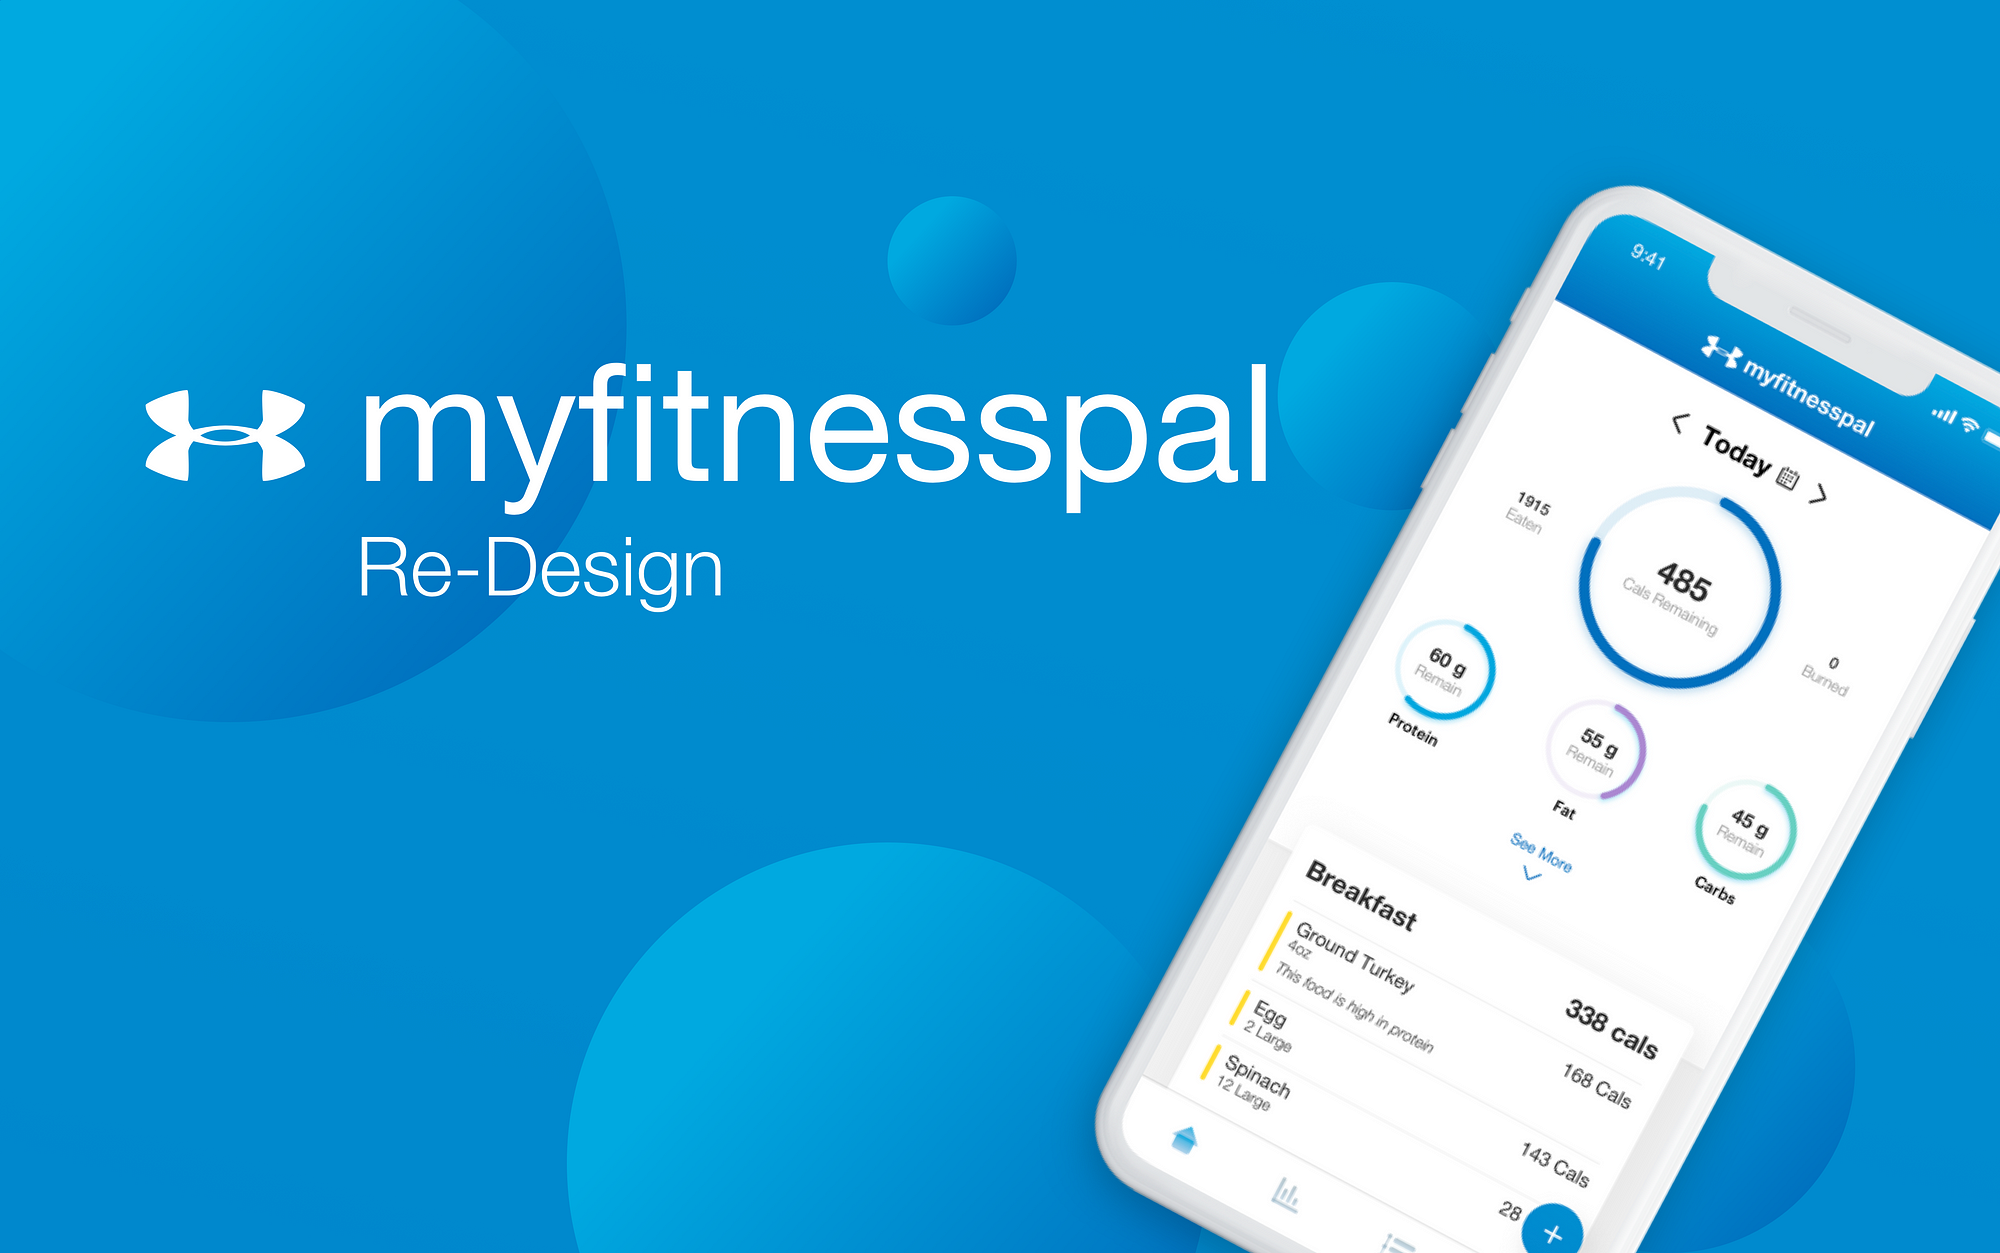 myfitnesspal Re-Design. A sharpened focus on user needs and a